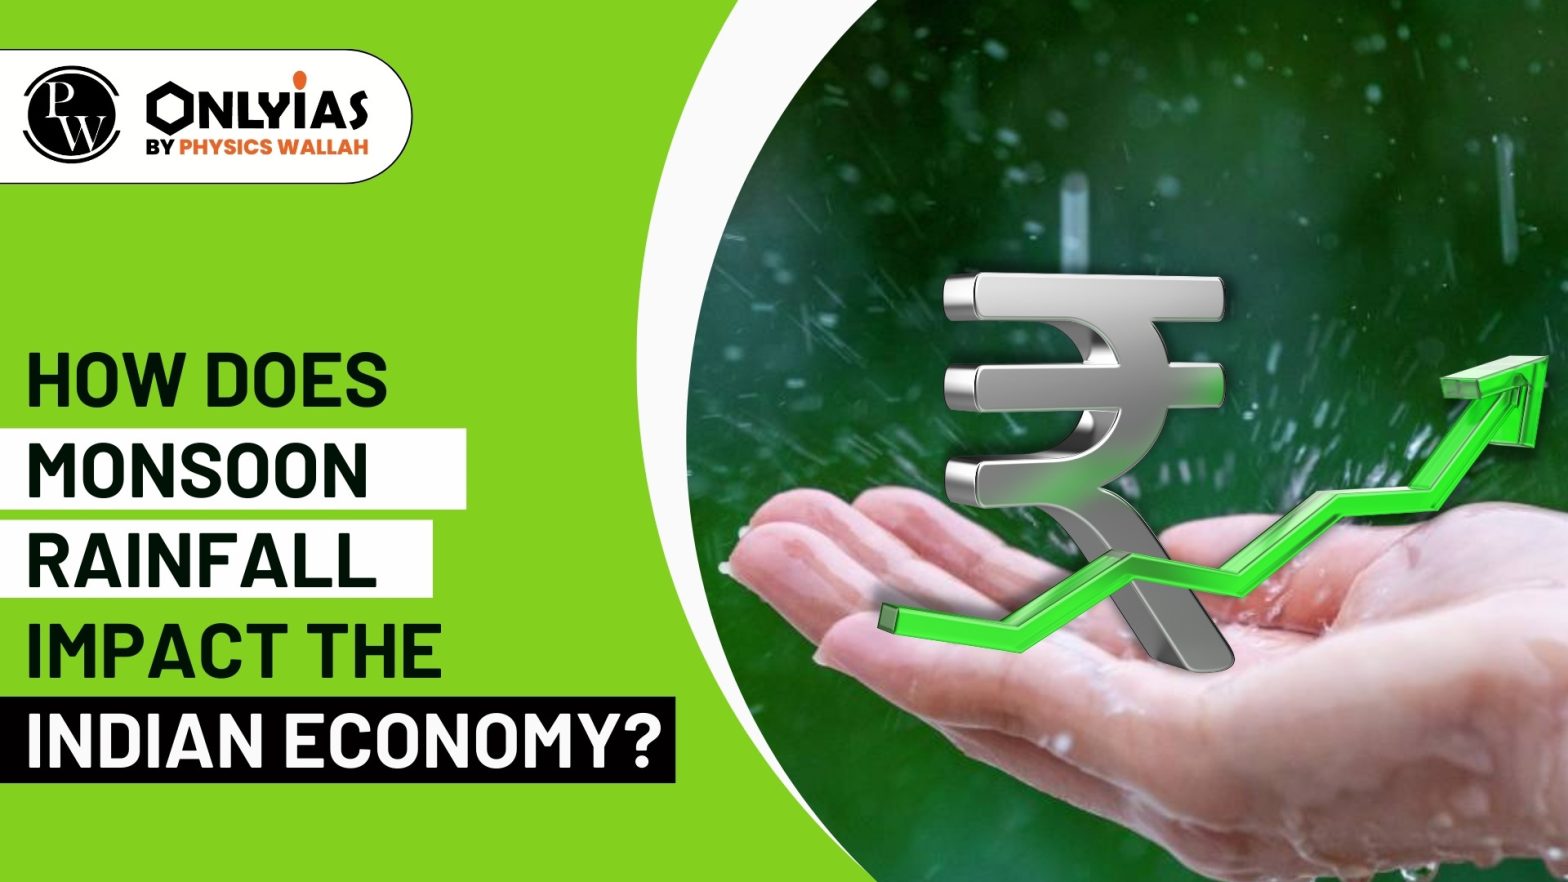 How Does Monsoon Rainfall Impact the Indian Economy?